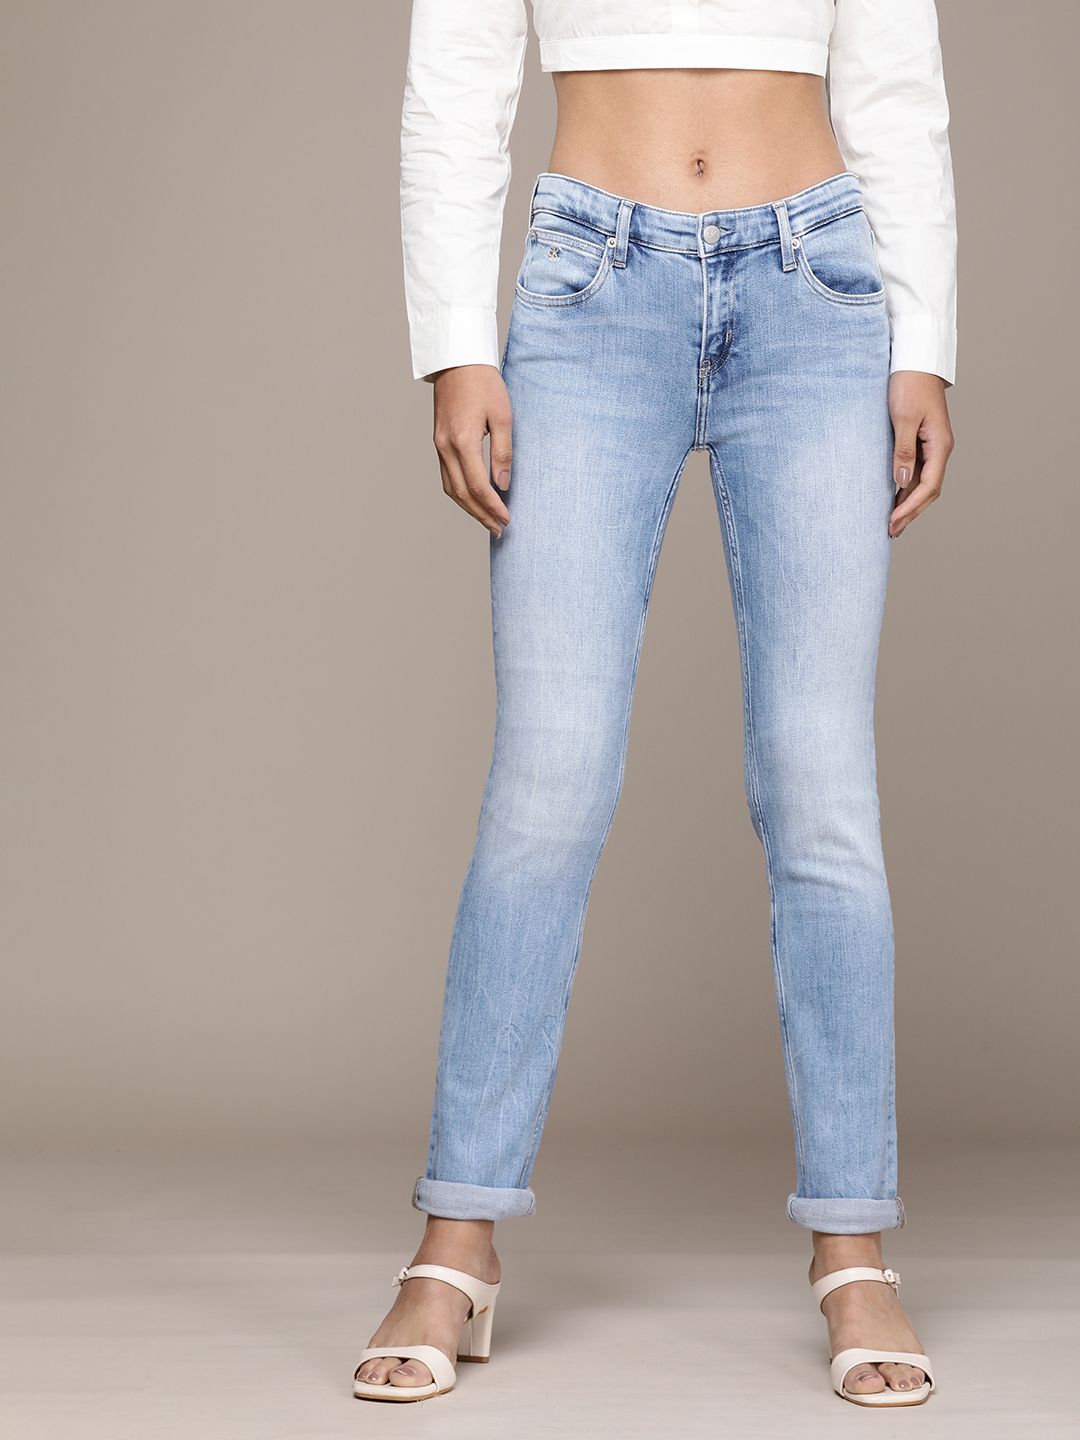 Calvin Klein Jeans Women Blue Body Slim Fit Light Fade Stretchable Casual Jeans Price in India